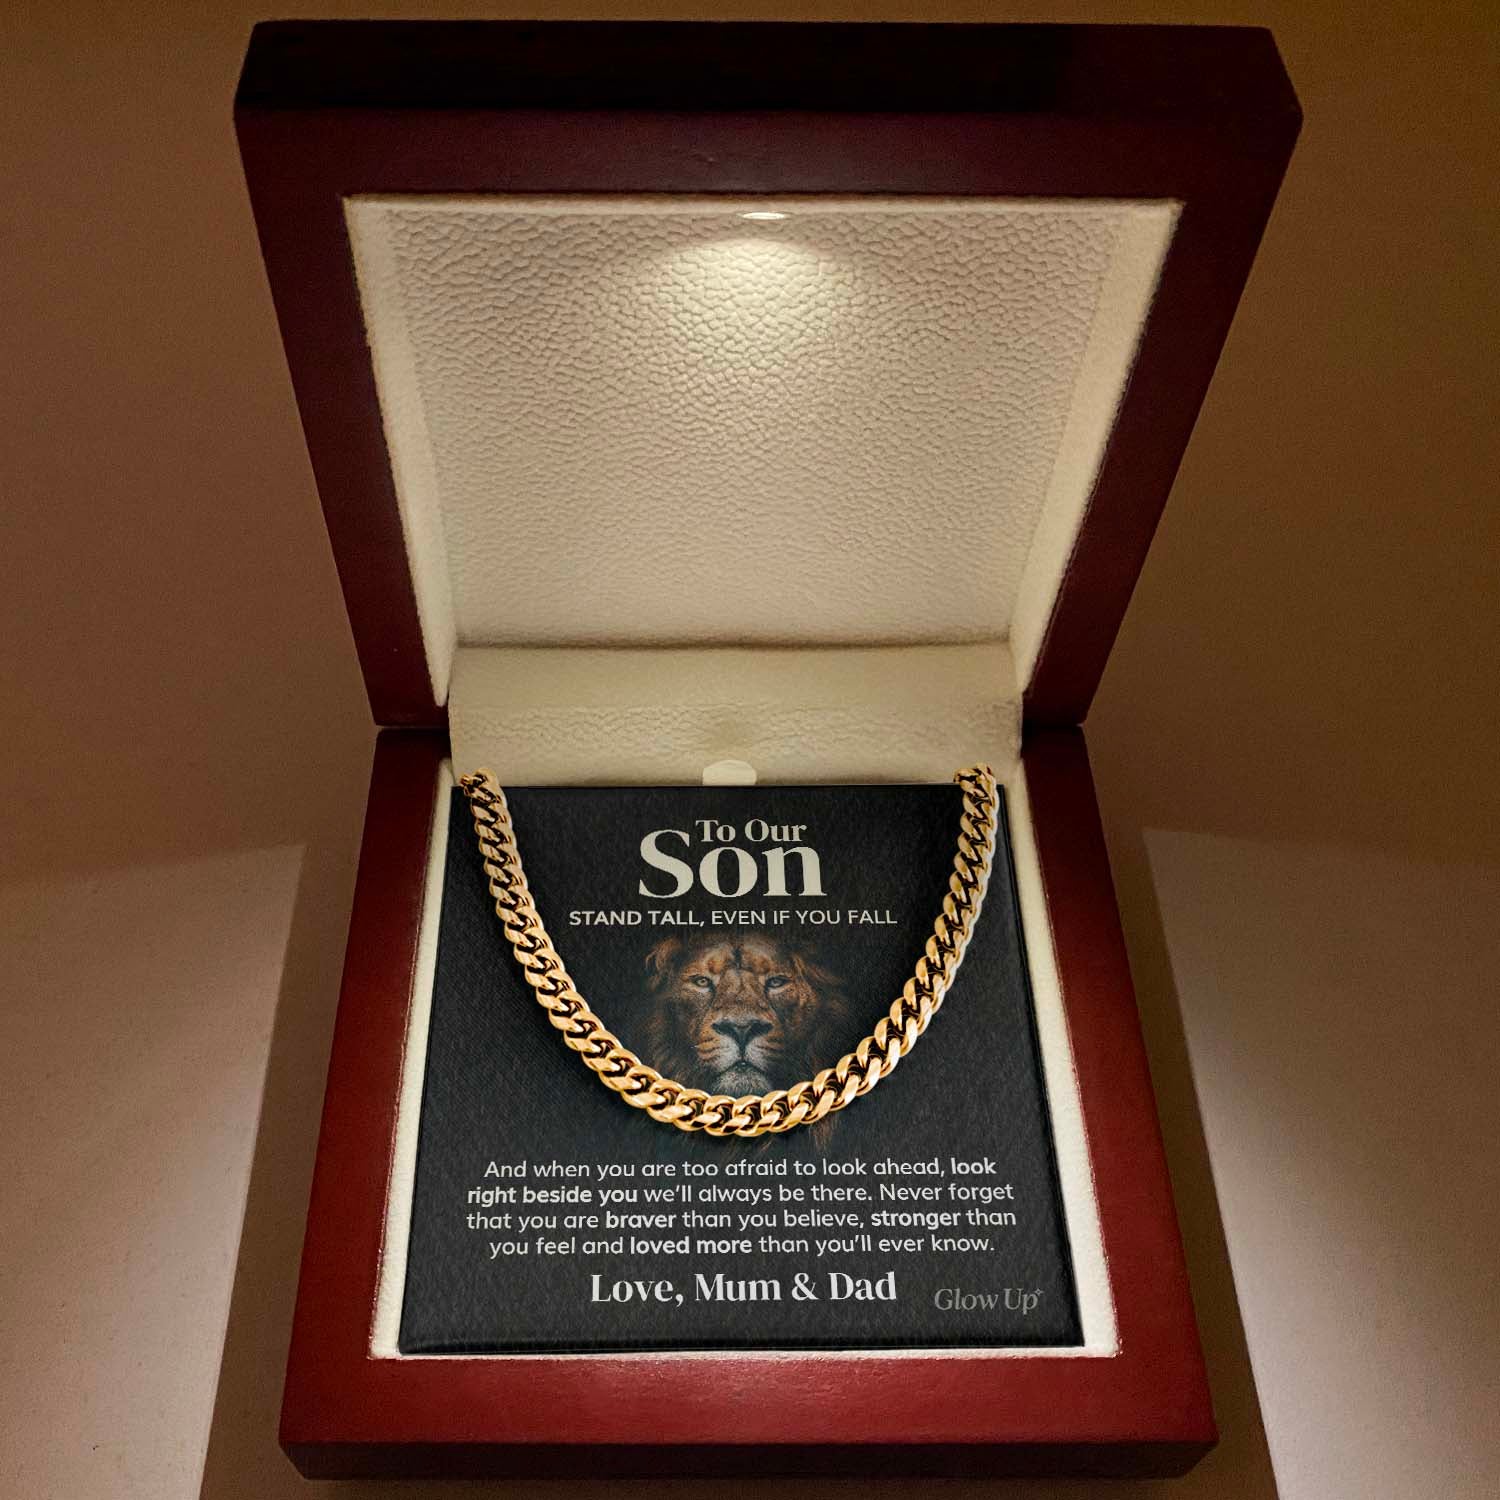 ShineOn Fulfillment Jewelry 14K Yellow Gold Finish / Luxury LED Box To Our Son from Mom and Dad - Stand tall - Cuban Link